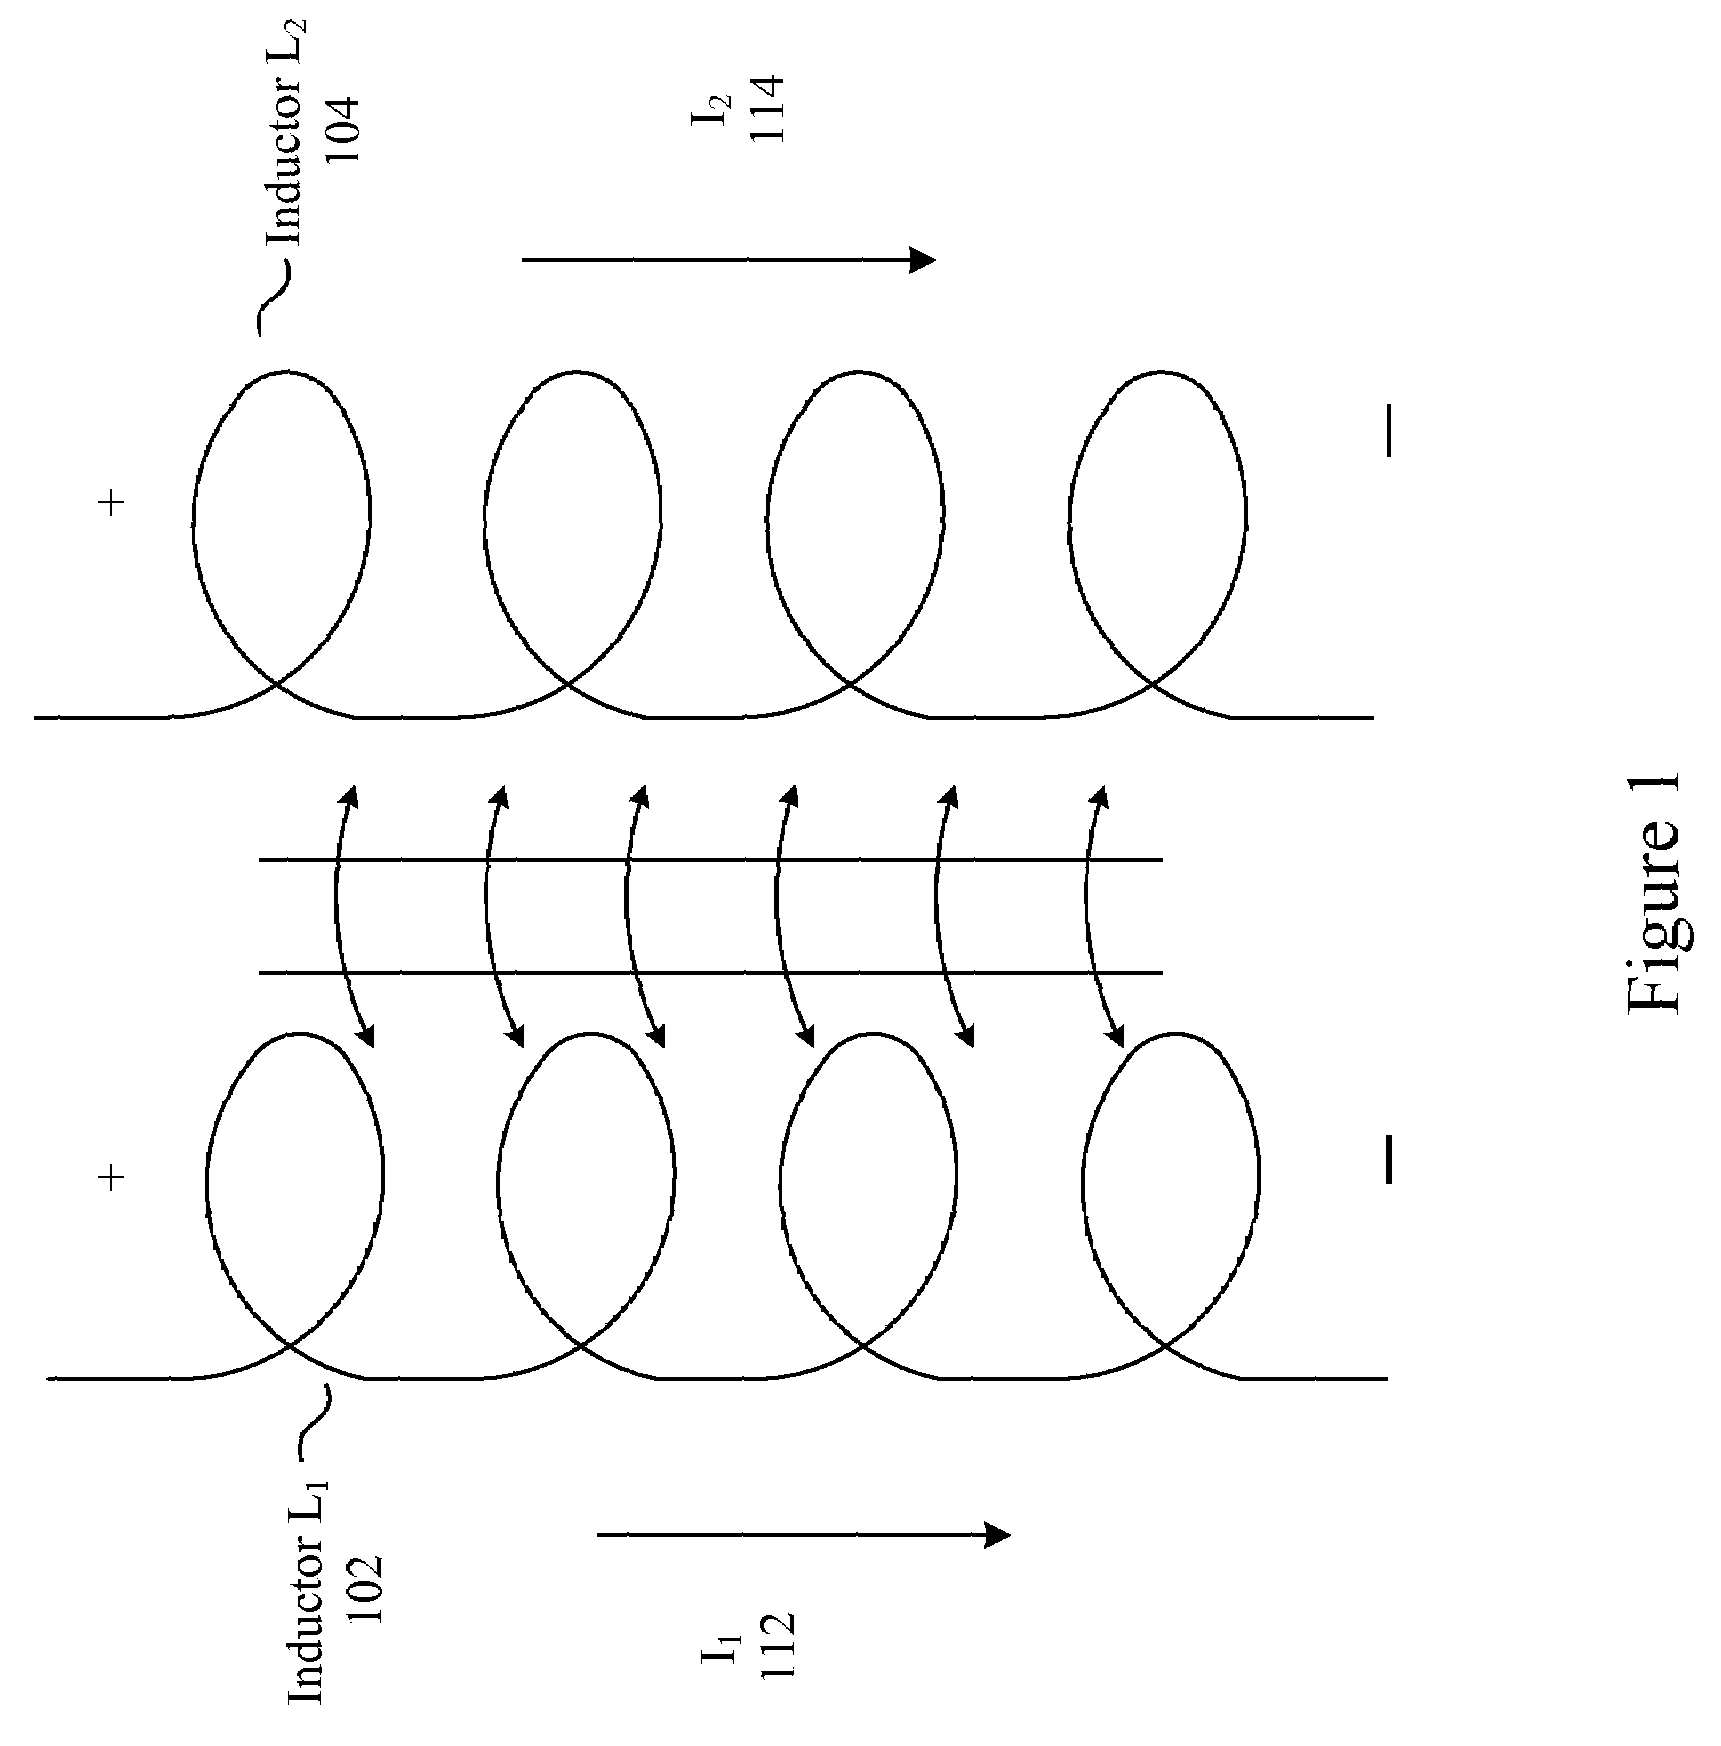 Low mutual inductance matched inductors